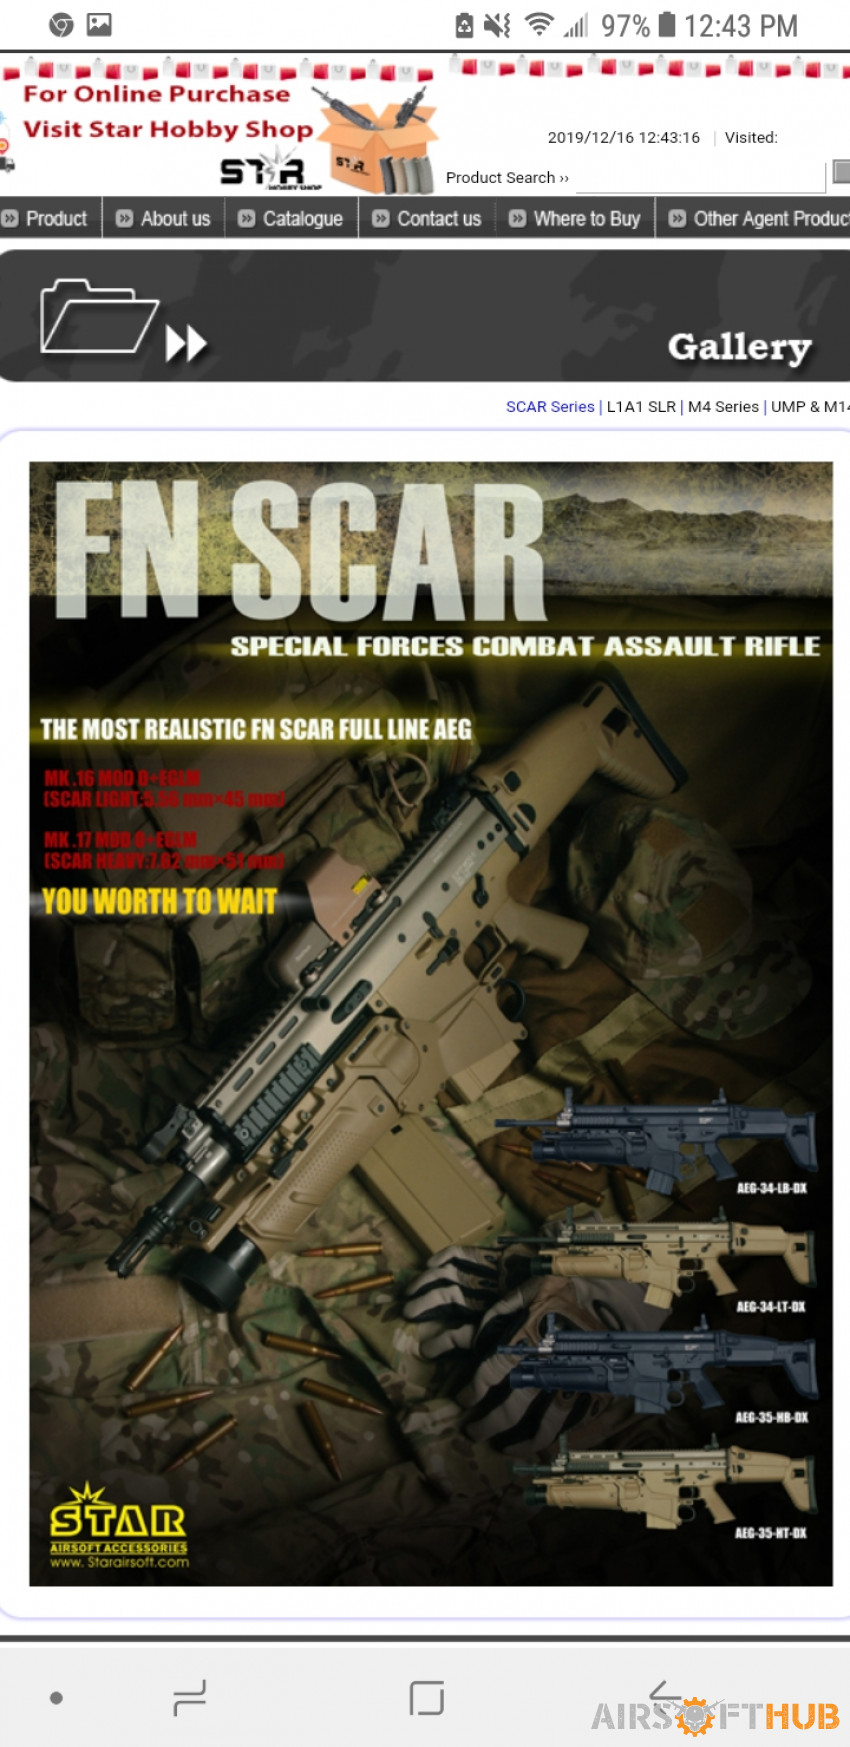 Scar L - Used airsoft equipment